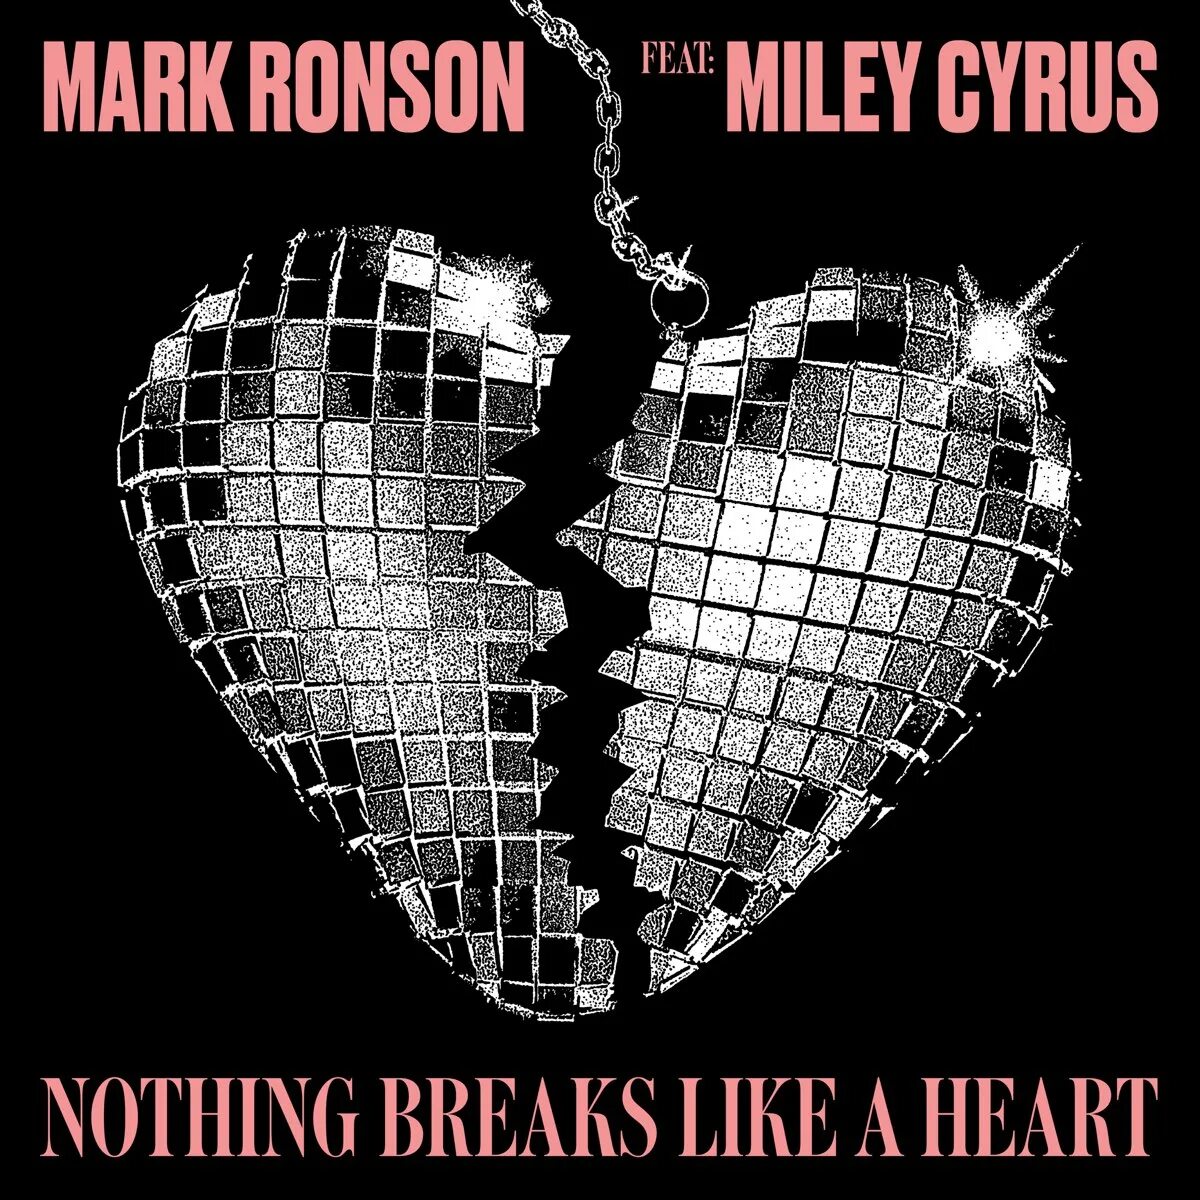 Nothing like a heart. Mark Ronson nothing Breaks like a Heart. Mark Ronson feat. Miley Cyrus. Mark Ronson Miley Cyrus nothing Breaks like a Heart. Mark-Ronson-Miley-Cyrus-nothing-Breaks-like-a.